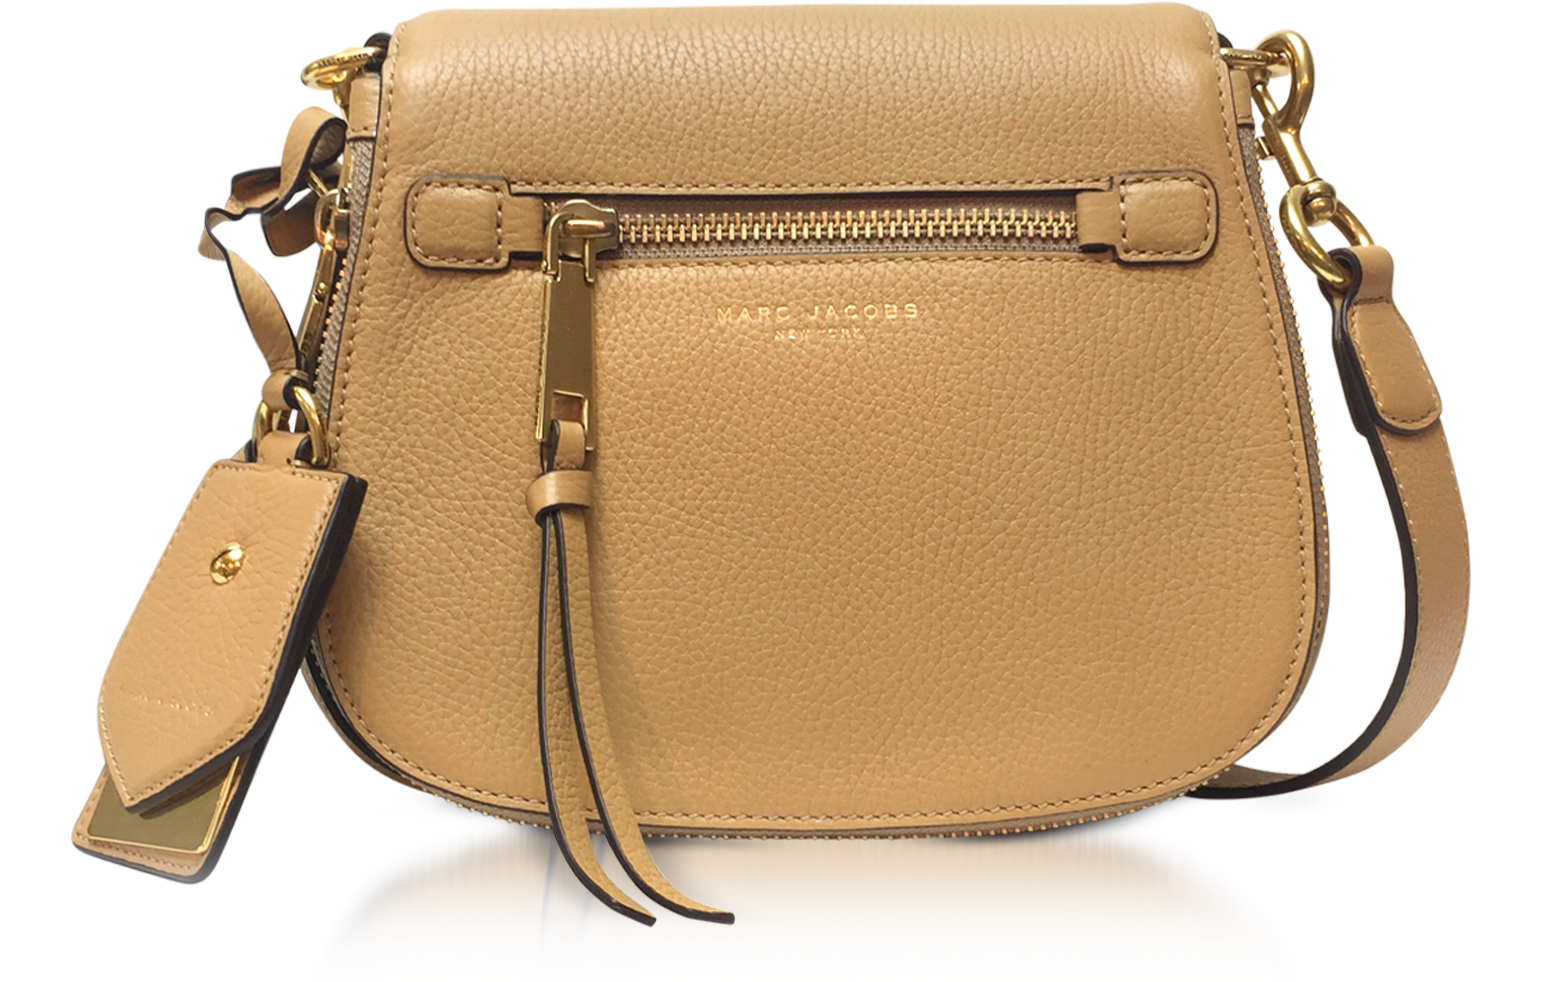 Marc Jacobs Recruit Golden Beige Leather Small Saddle Bag at FORZIERI